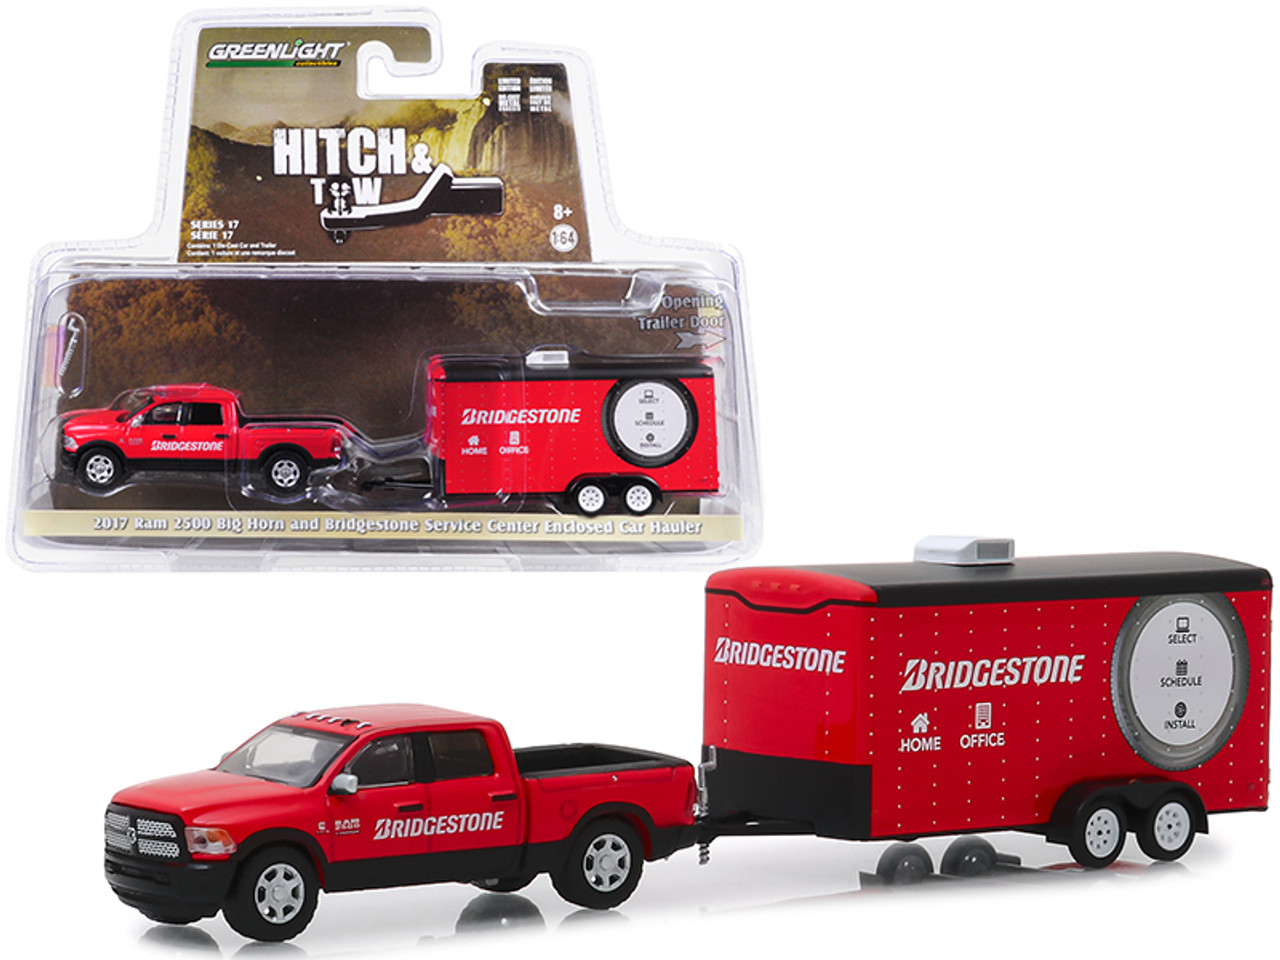 2017 RAM 2500 Big Horn Pickup Truck and Enclosed Car Hauler "Bridgestone Service Center" Red "Hitch & Tow" Series 17 1/64 Diecast Model Car by Greenlight